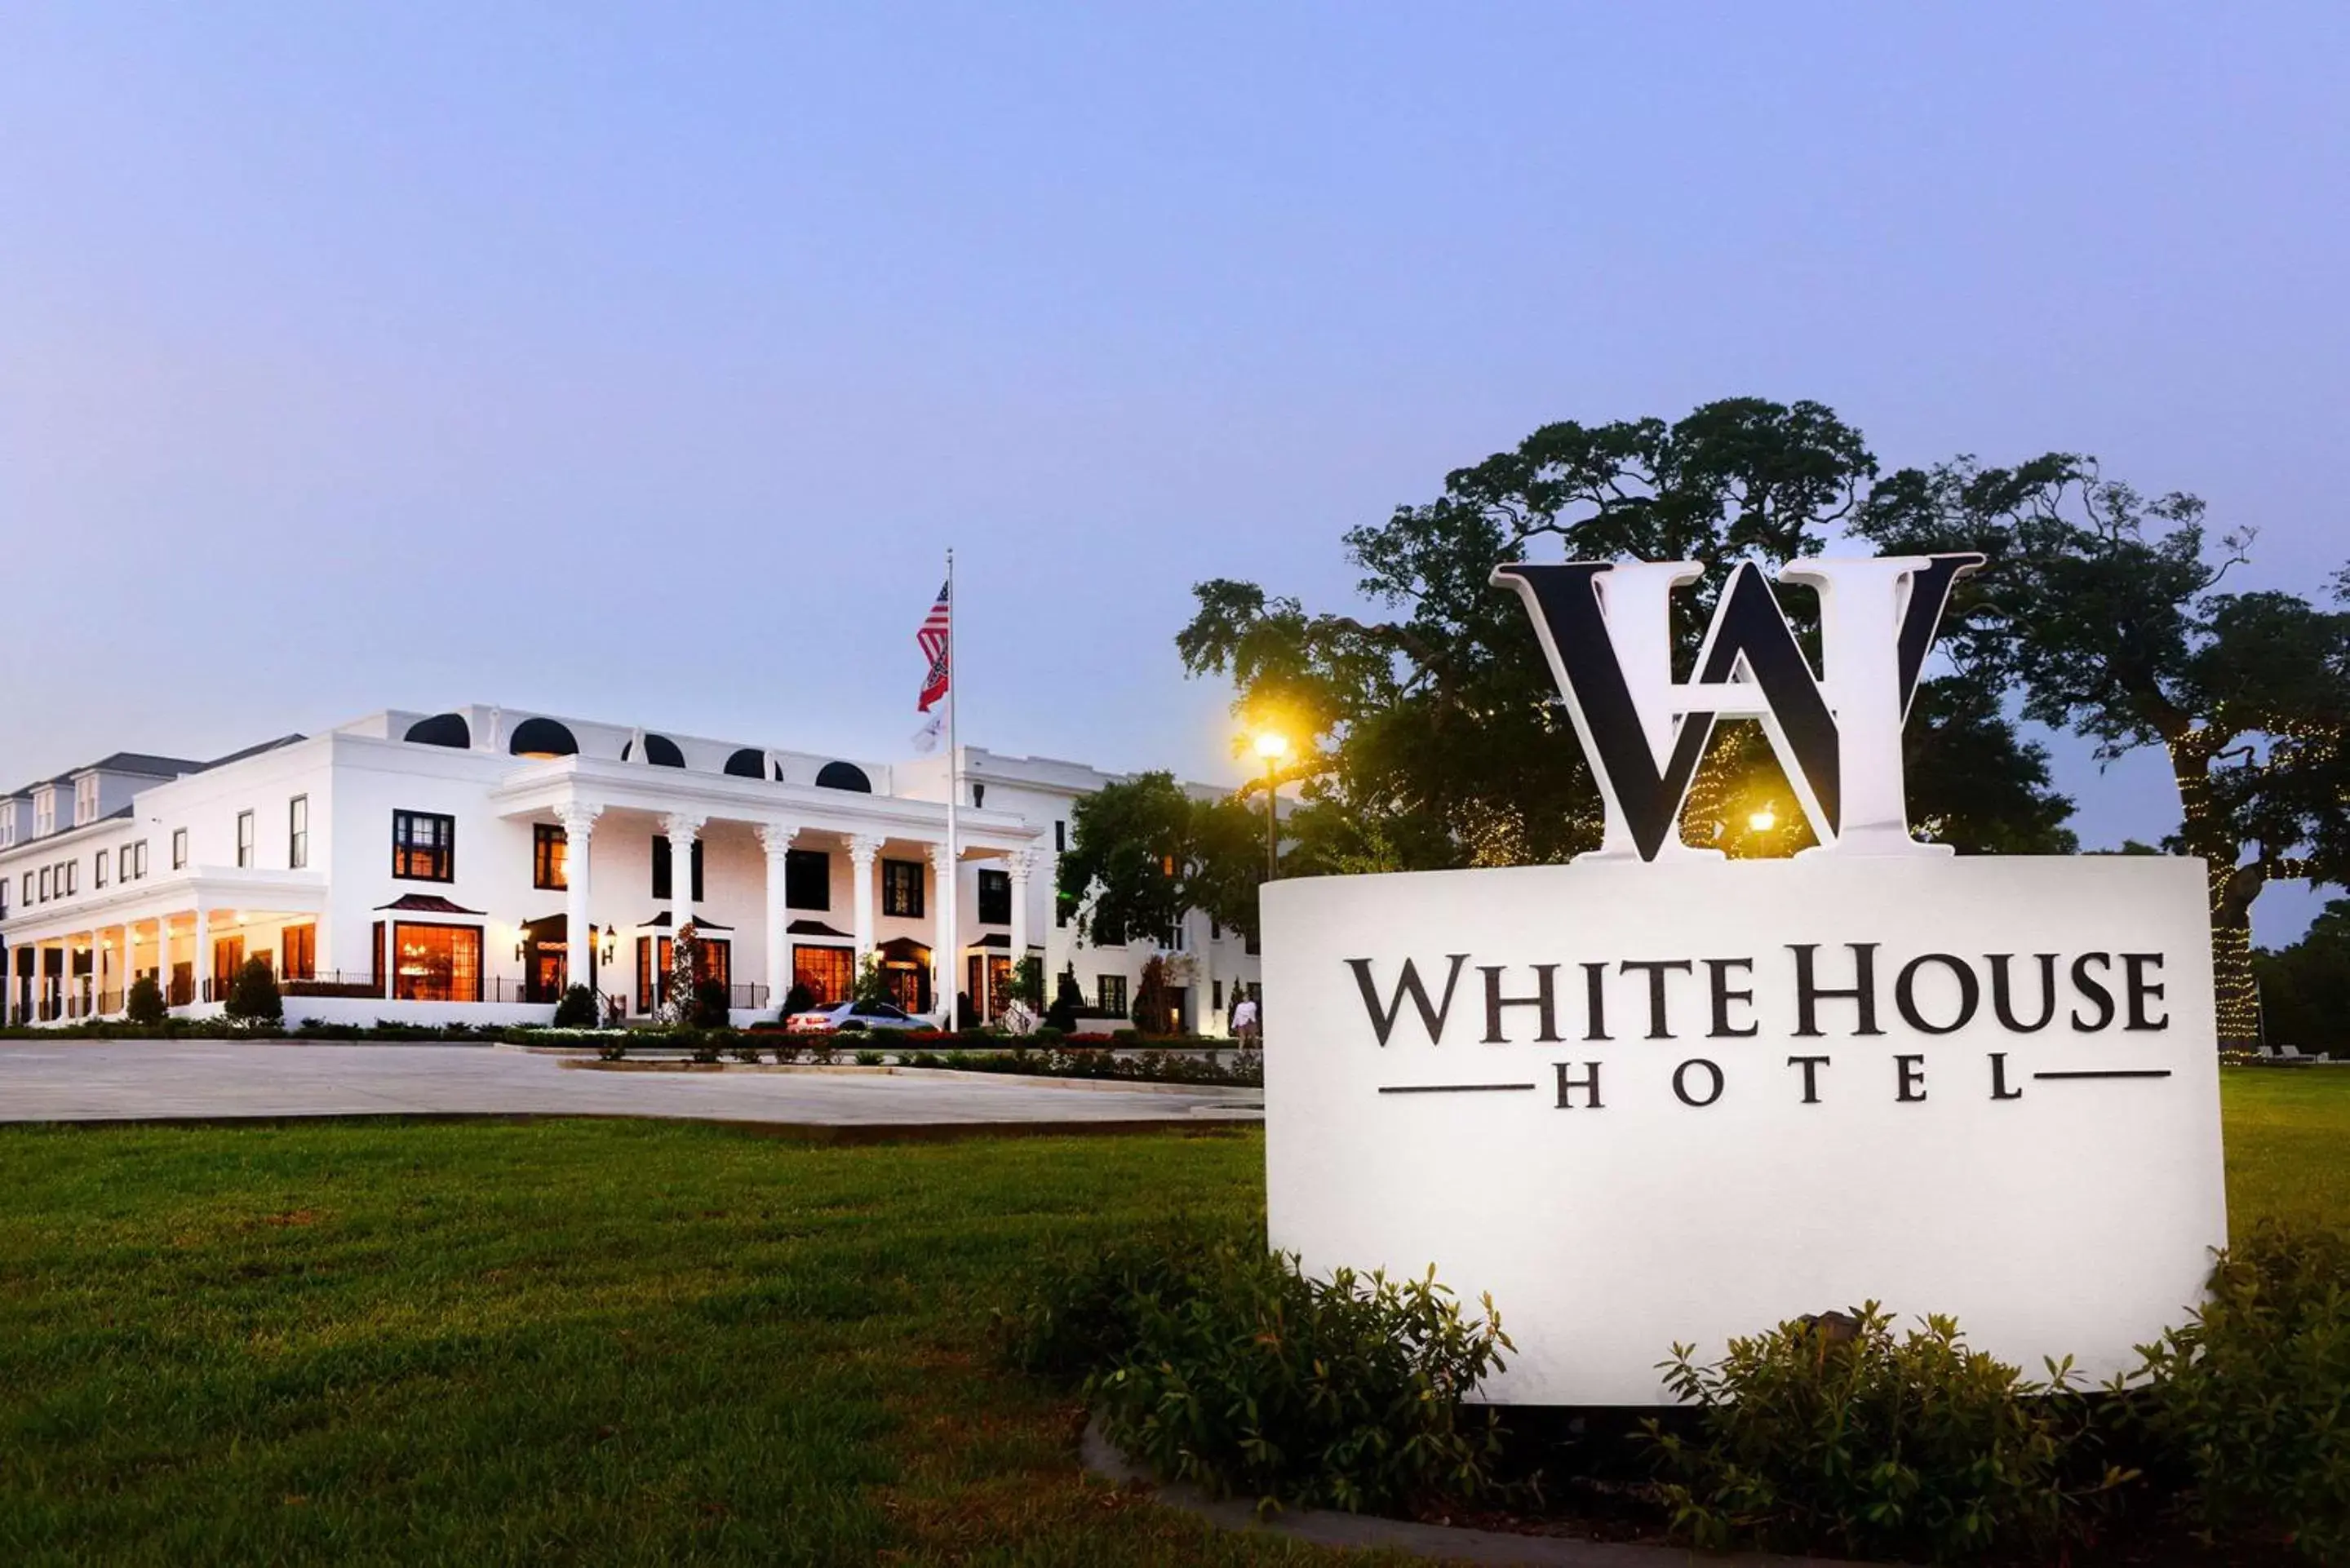 Property Building in White House Hotel